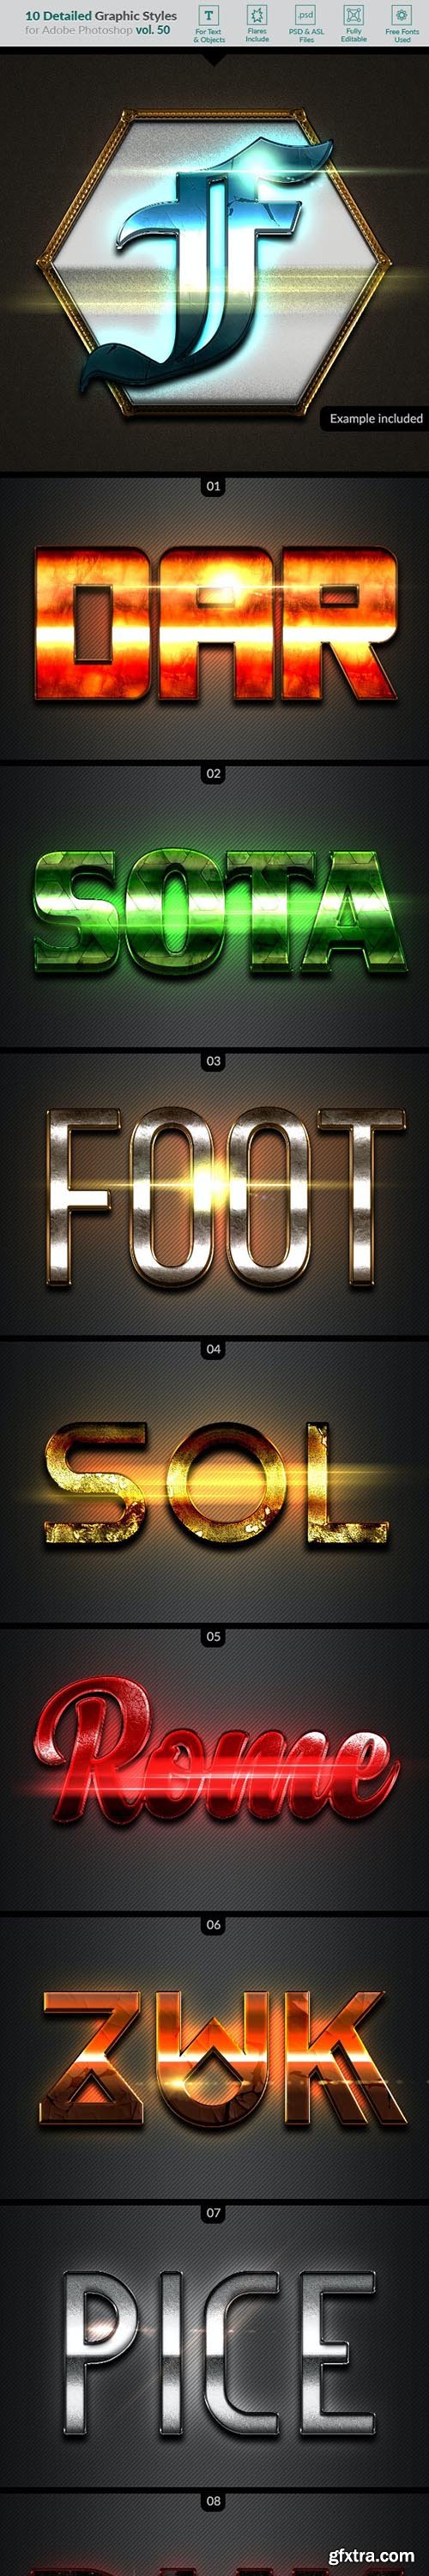 GraphicRiver - 10 Text Effects Vol. 50 26909356